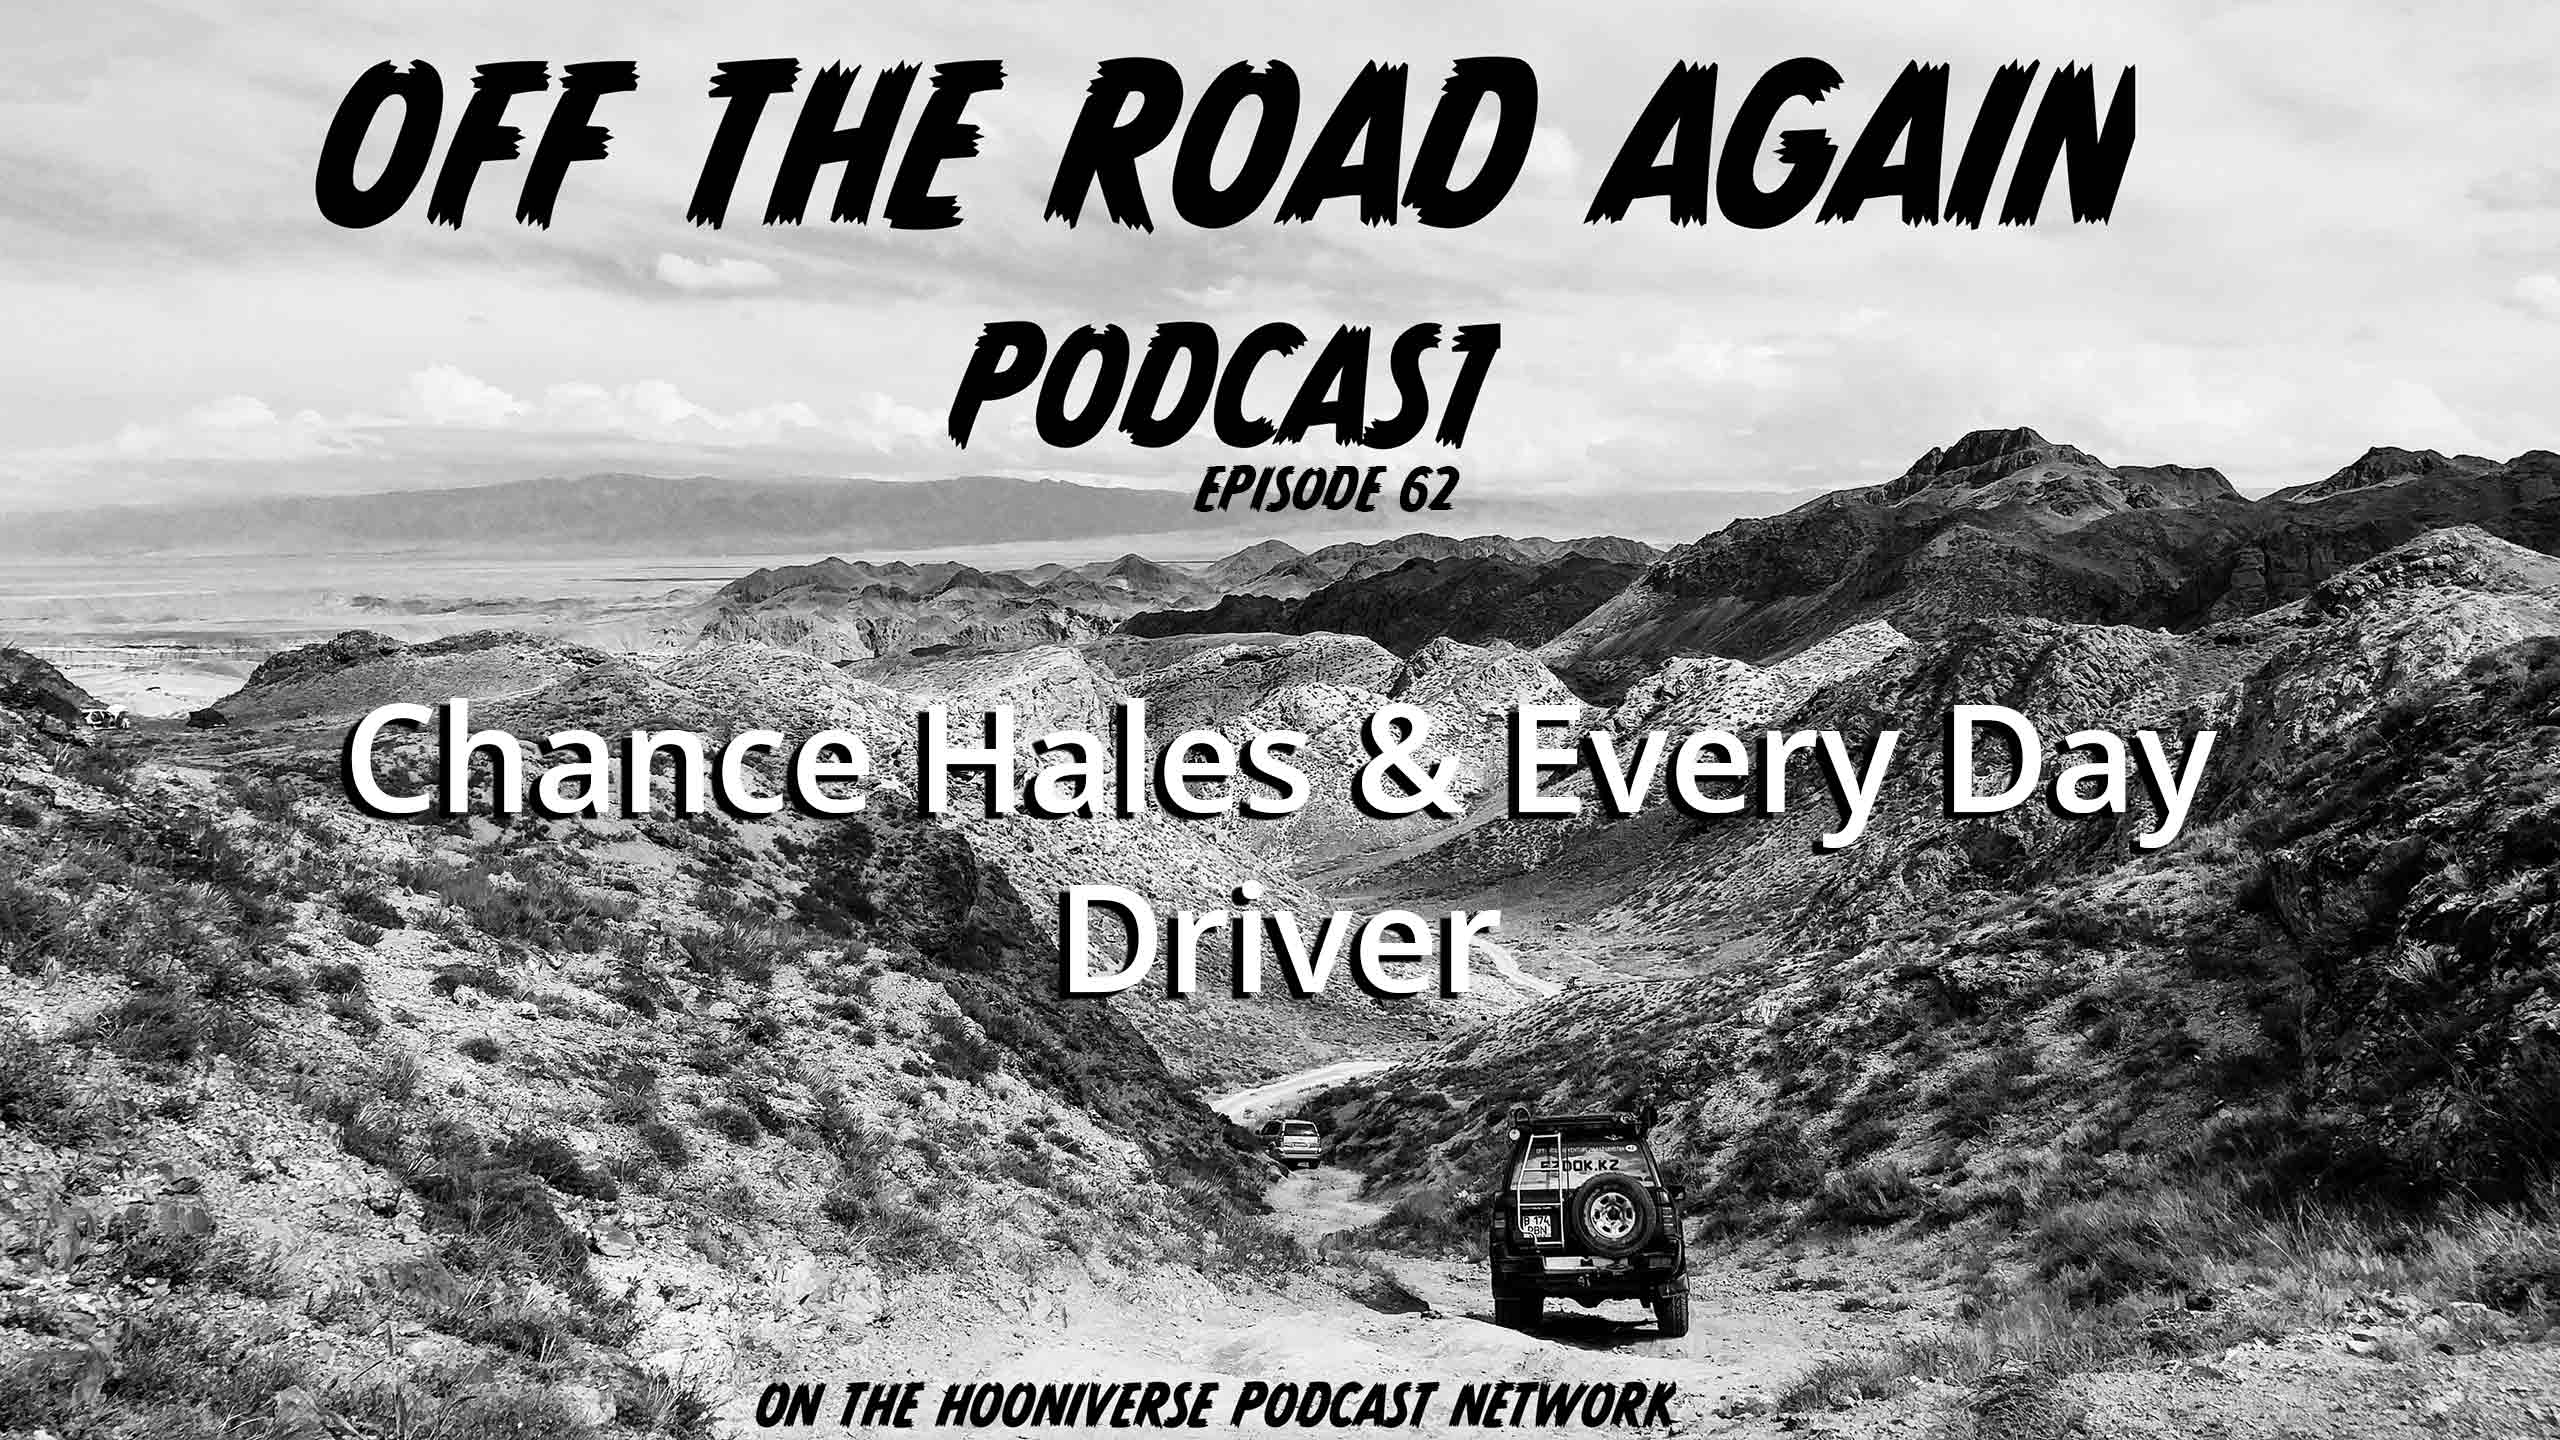 Chance-Hales-Everyday-Driver-Off-The-Road-Again-Podcast-Episode-62